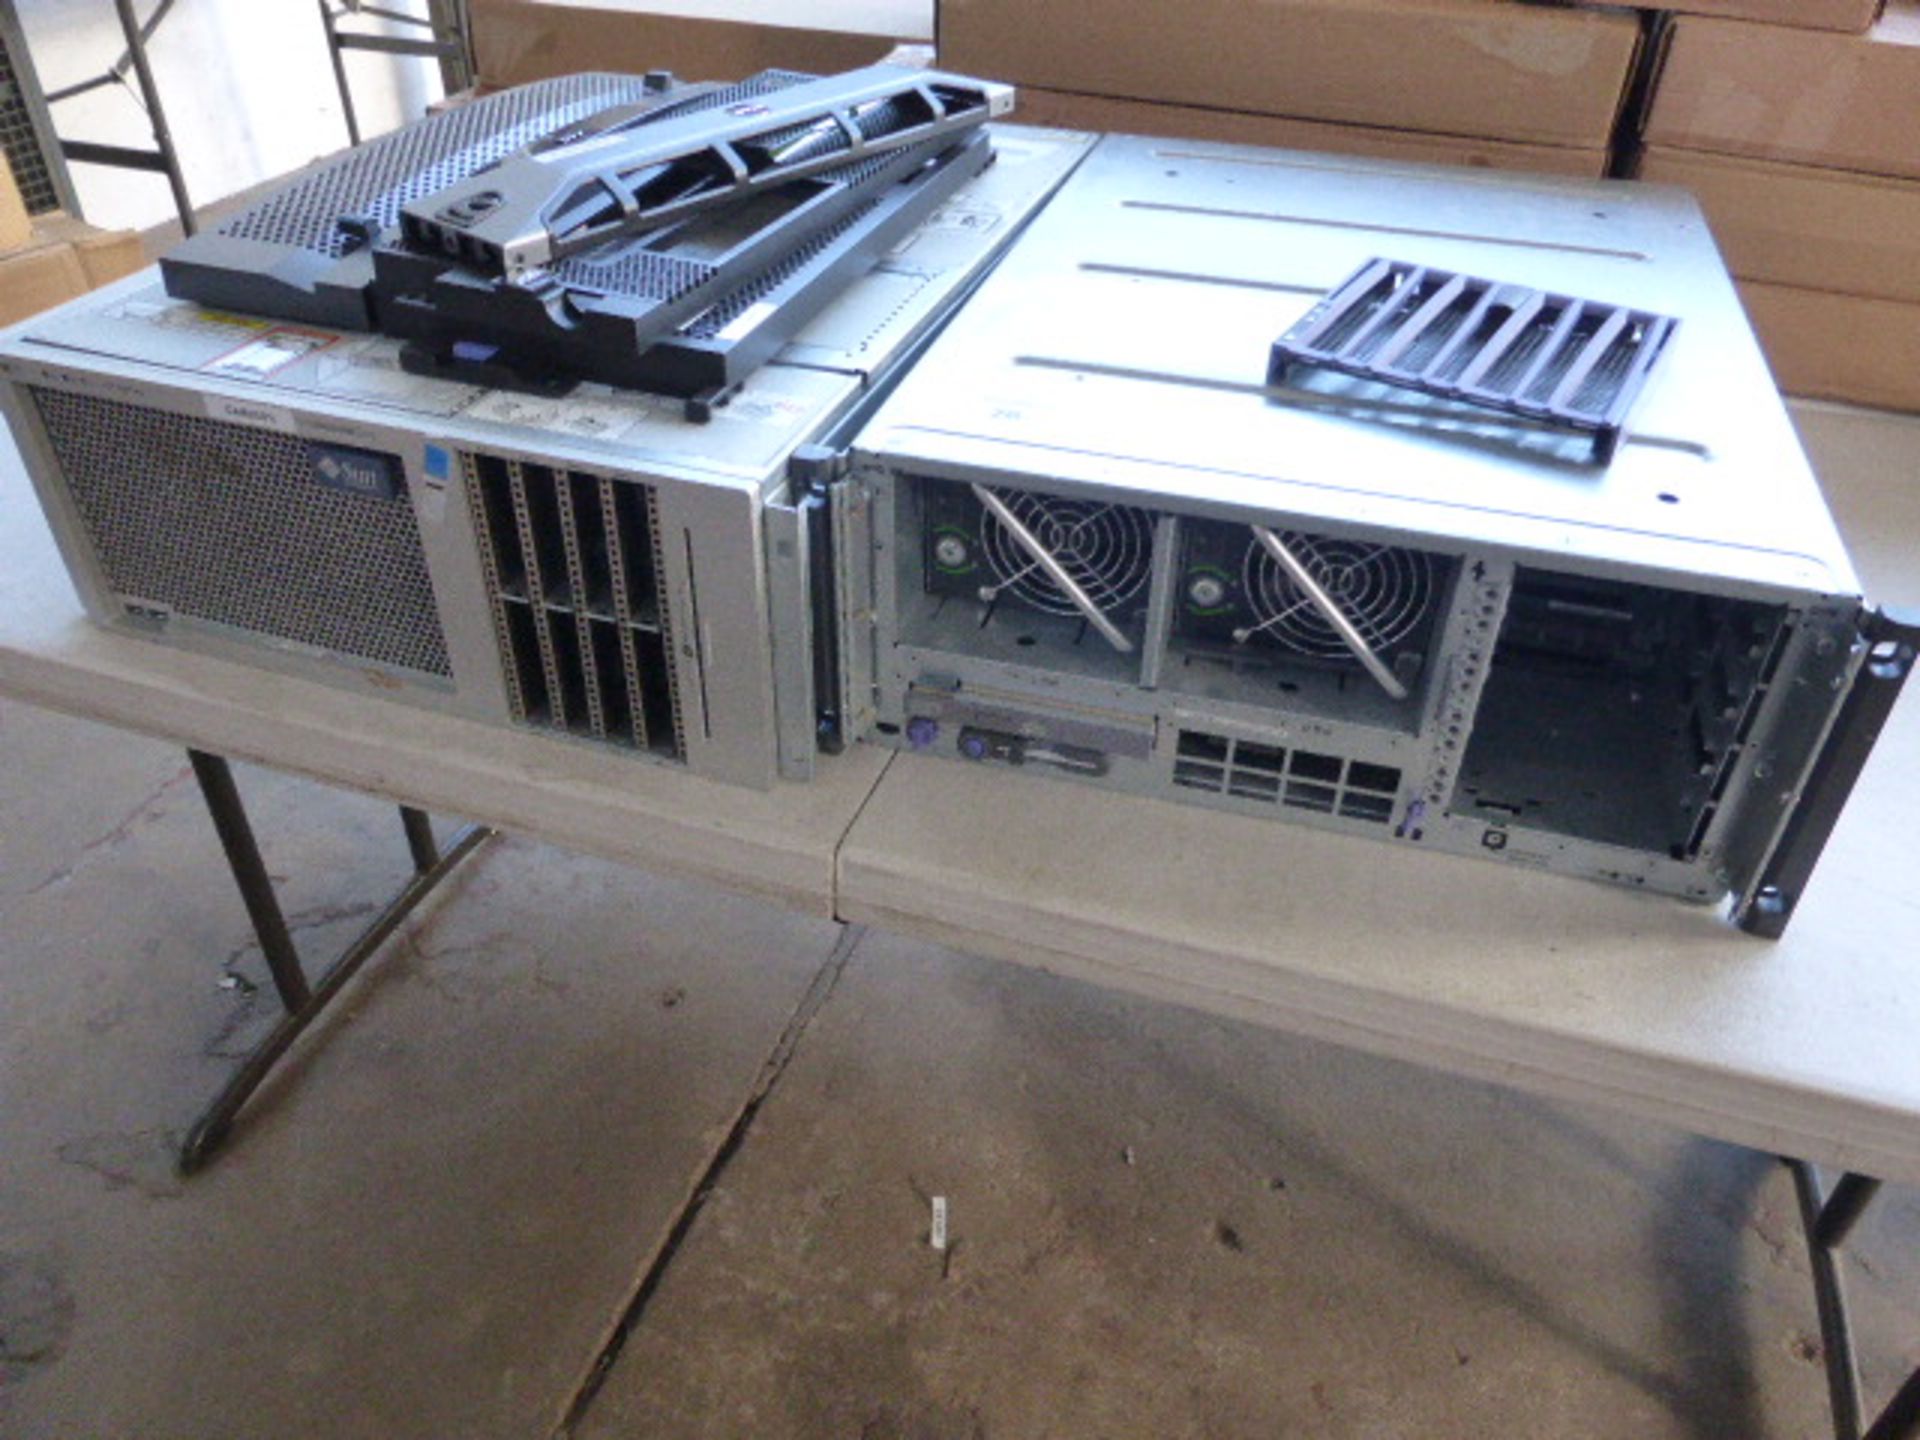 2 Sun rack mounted servers, no hard drives; 1 Sun Fire V445 and the other similar